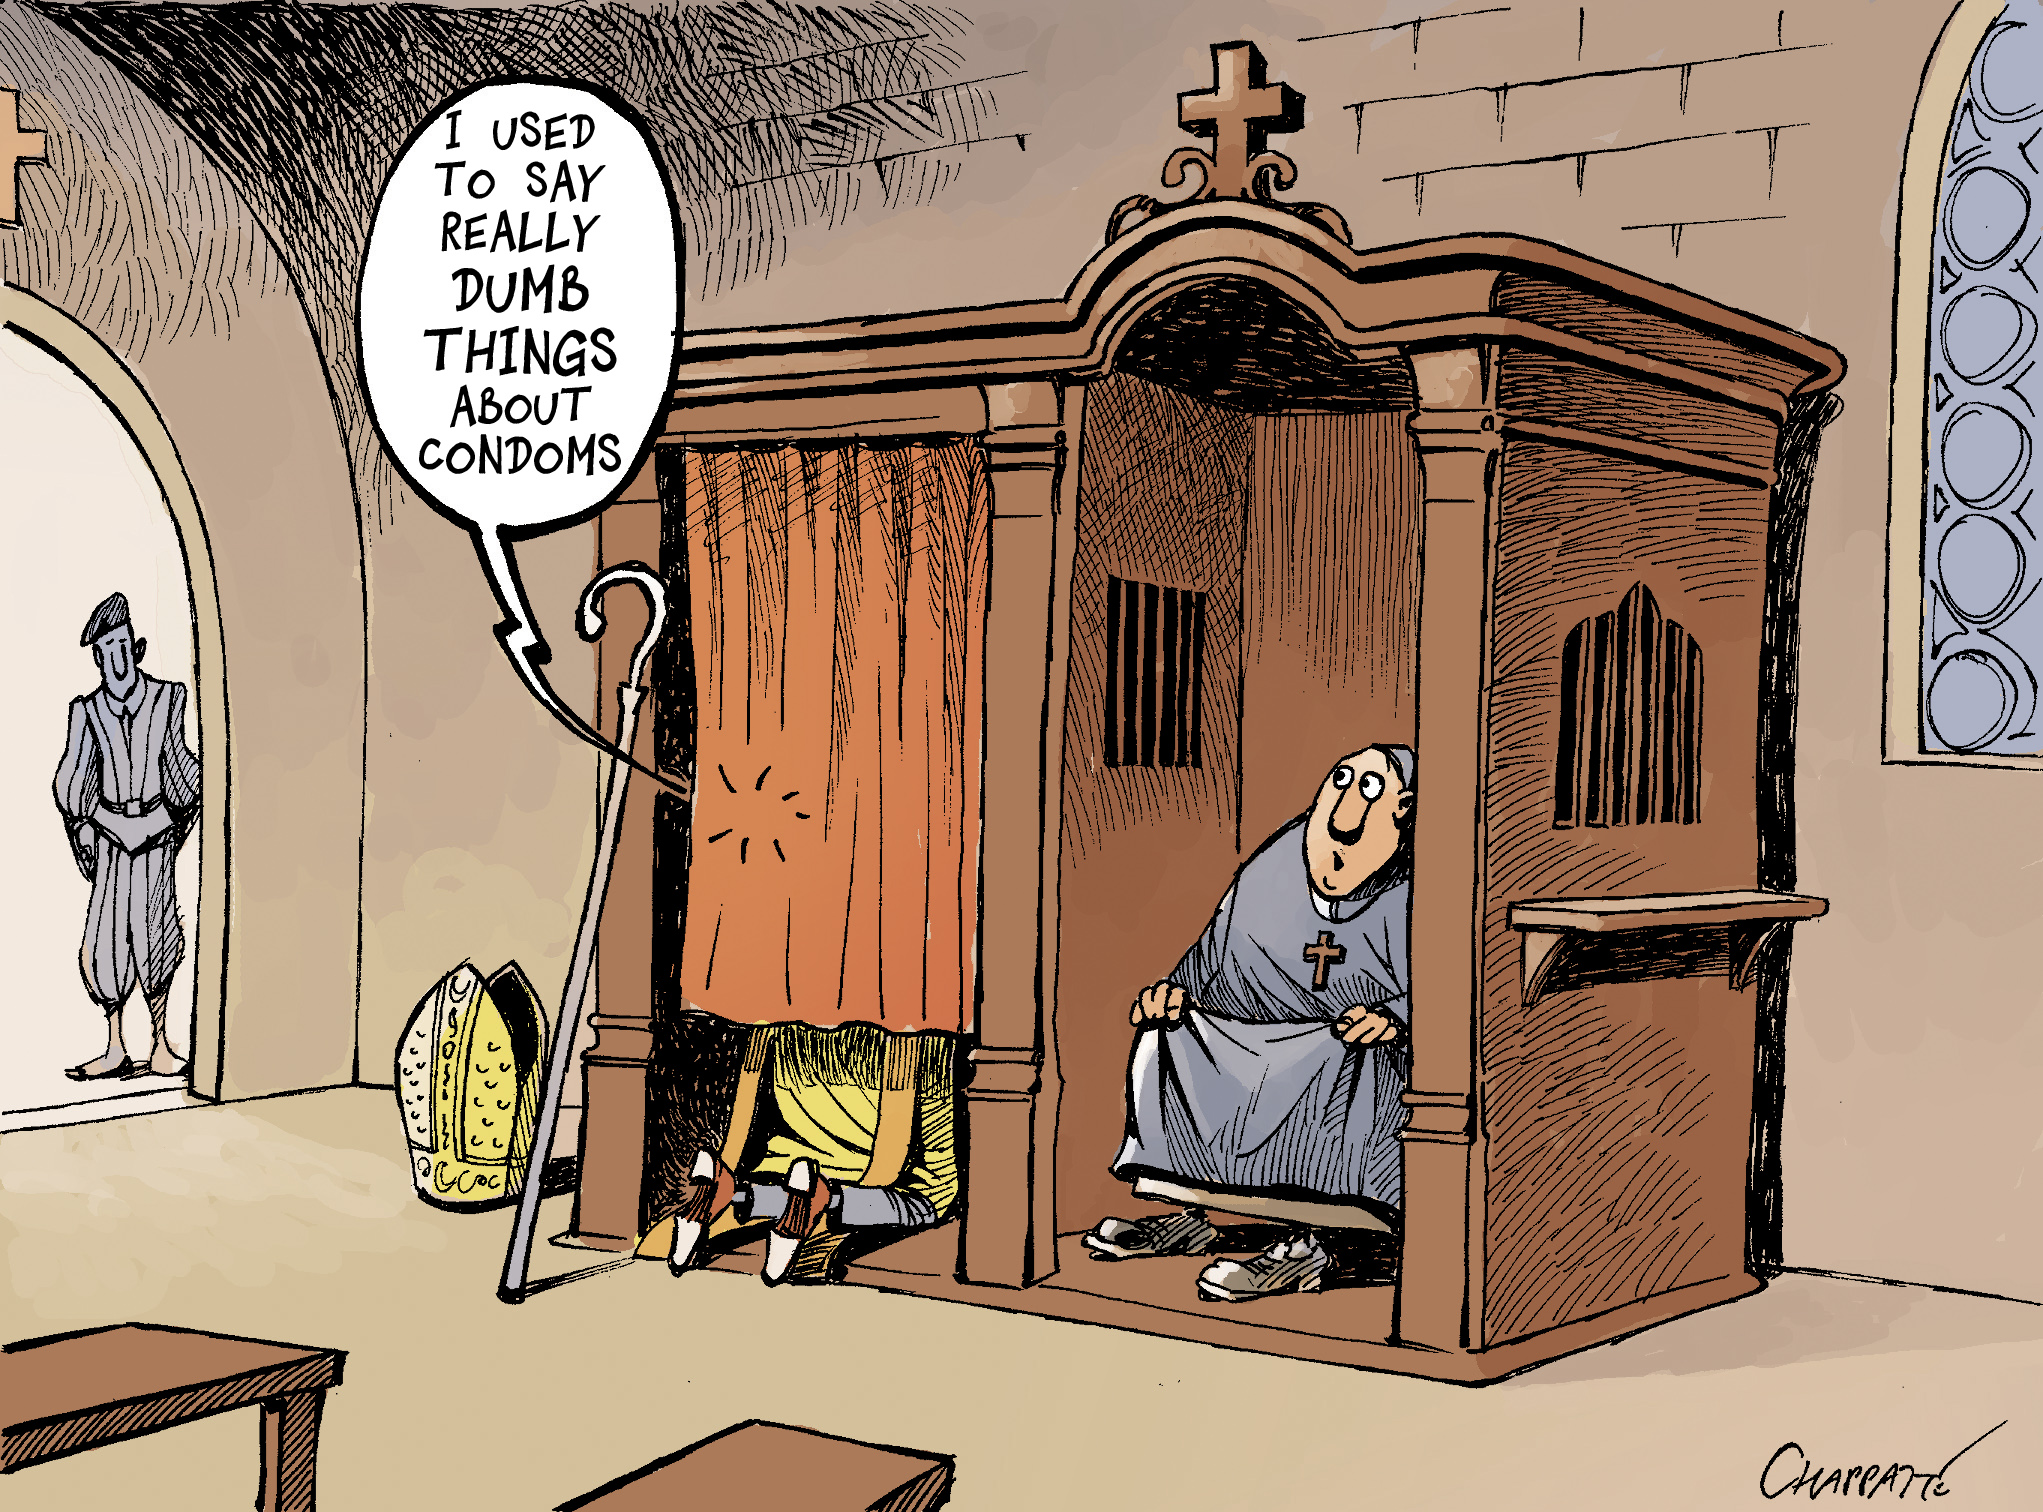 The Pope Softens His Stance On Condoms Globecartoon Political Cartoons Patrick Chappatte 6581